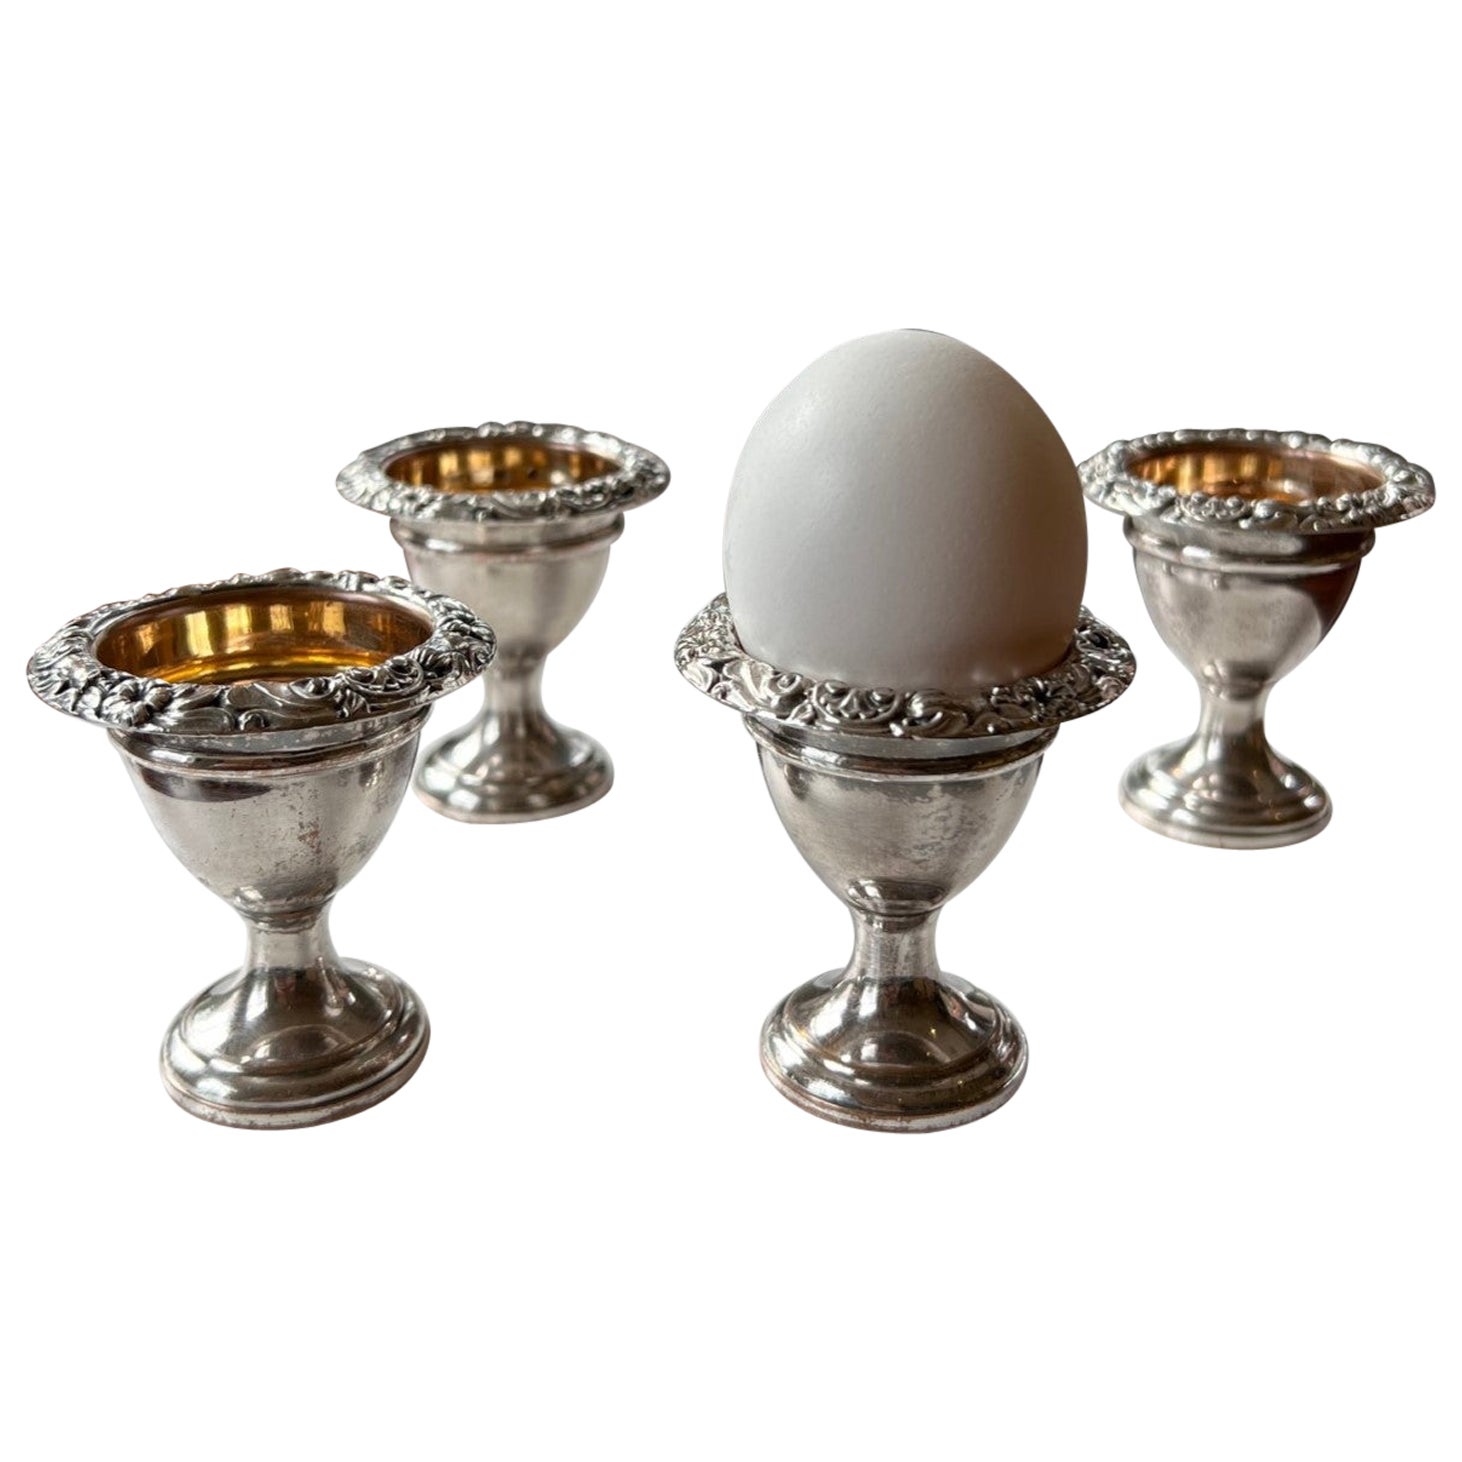 Antique Silverplate and Gilt Egg Cups - Set of 4 For Sale